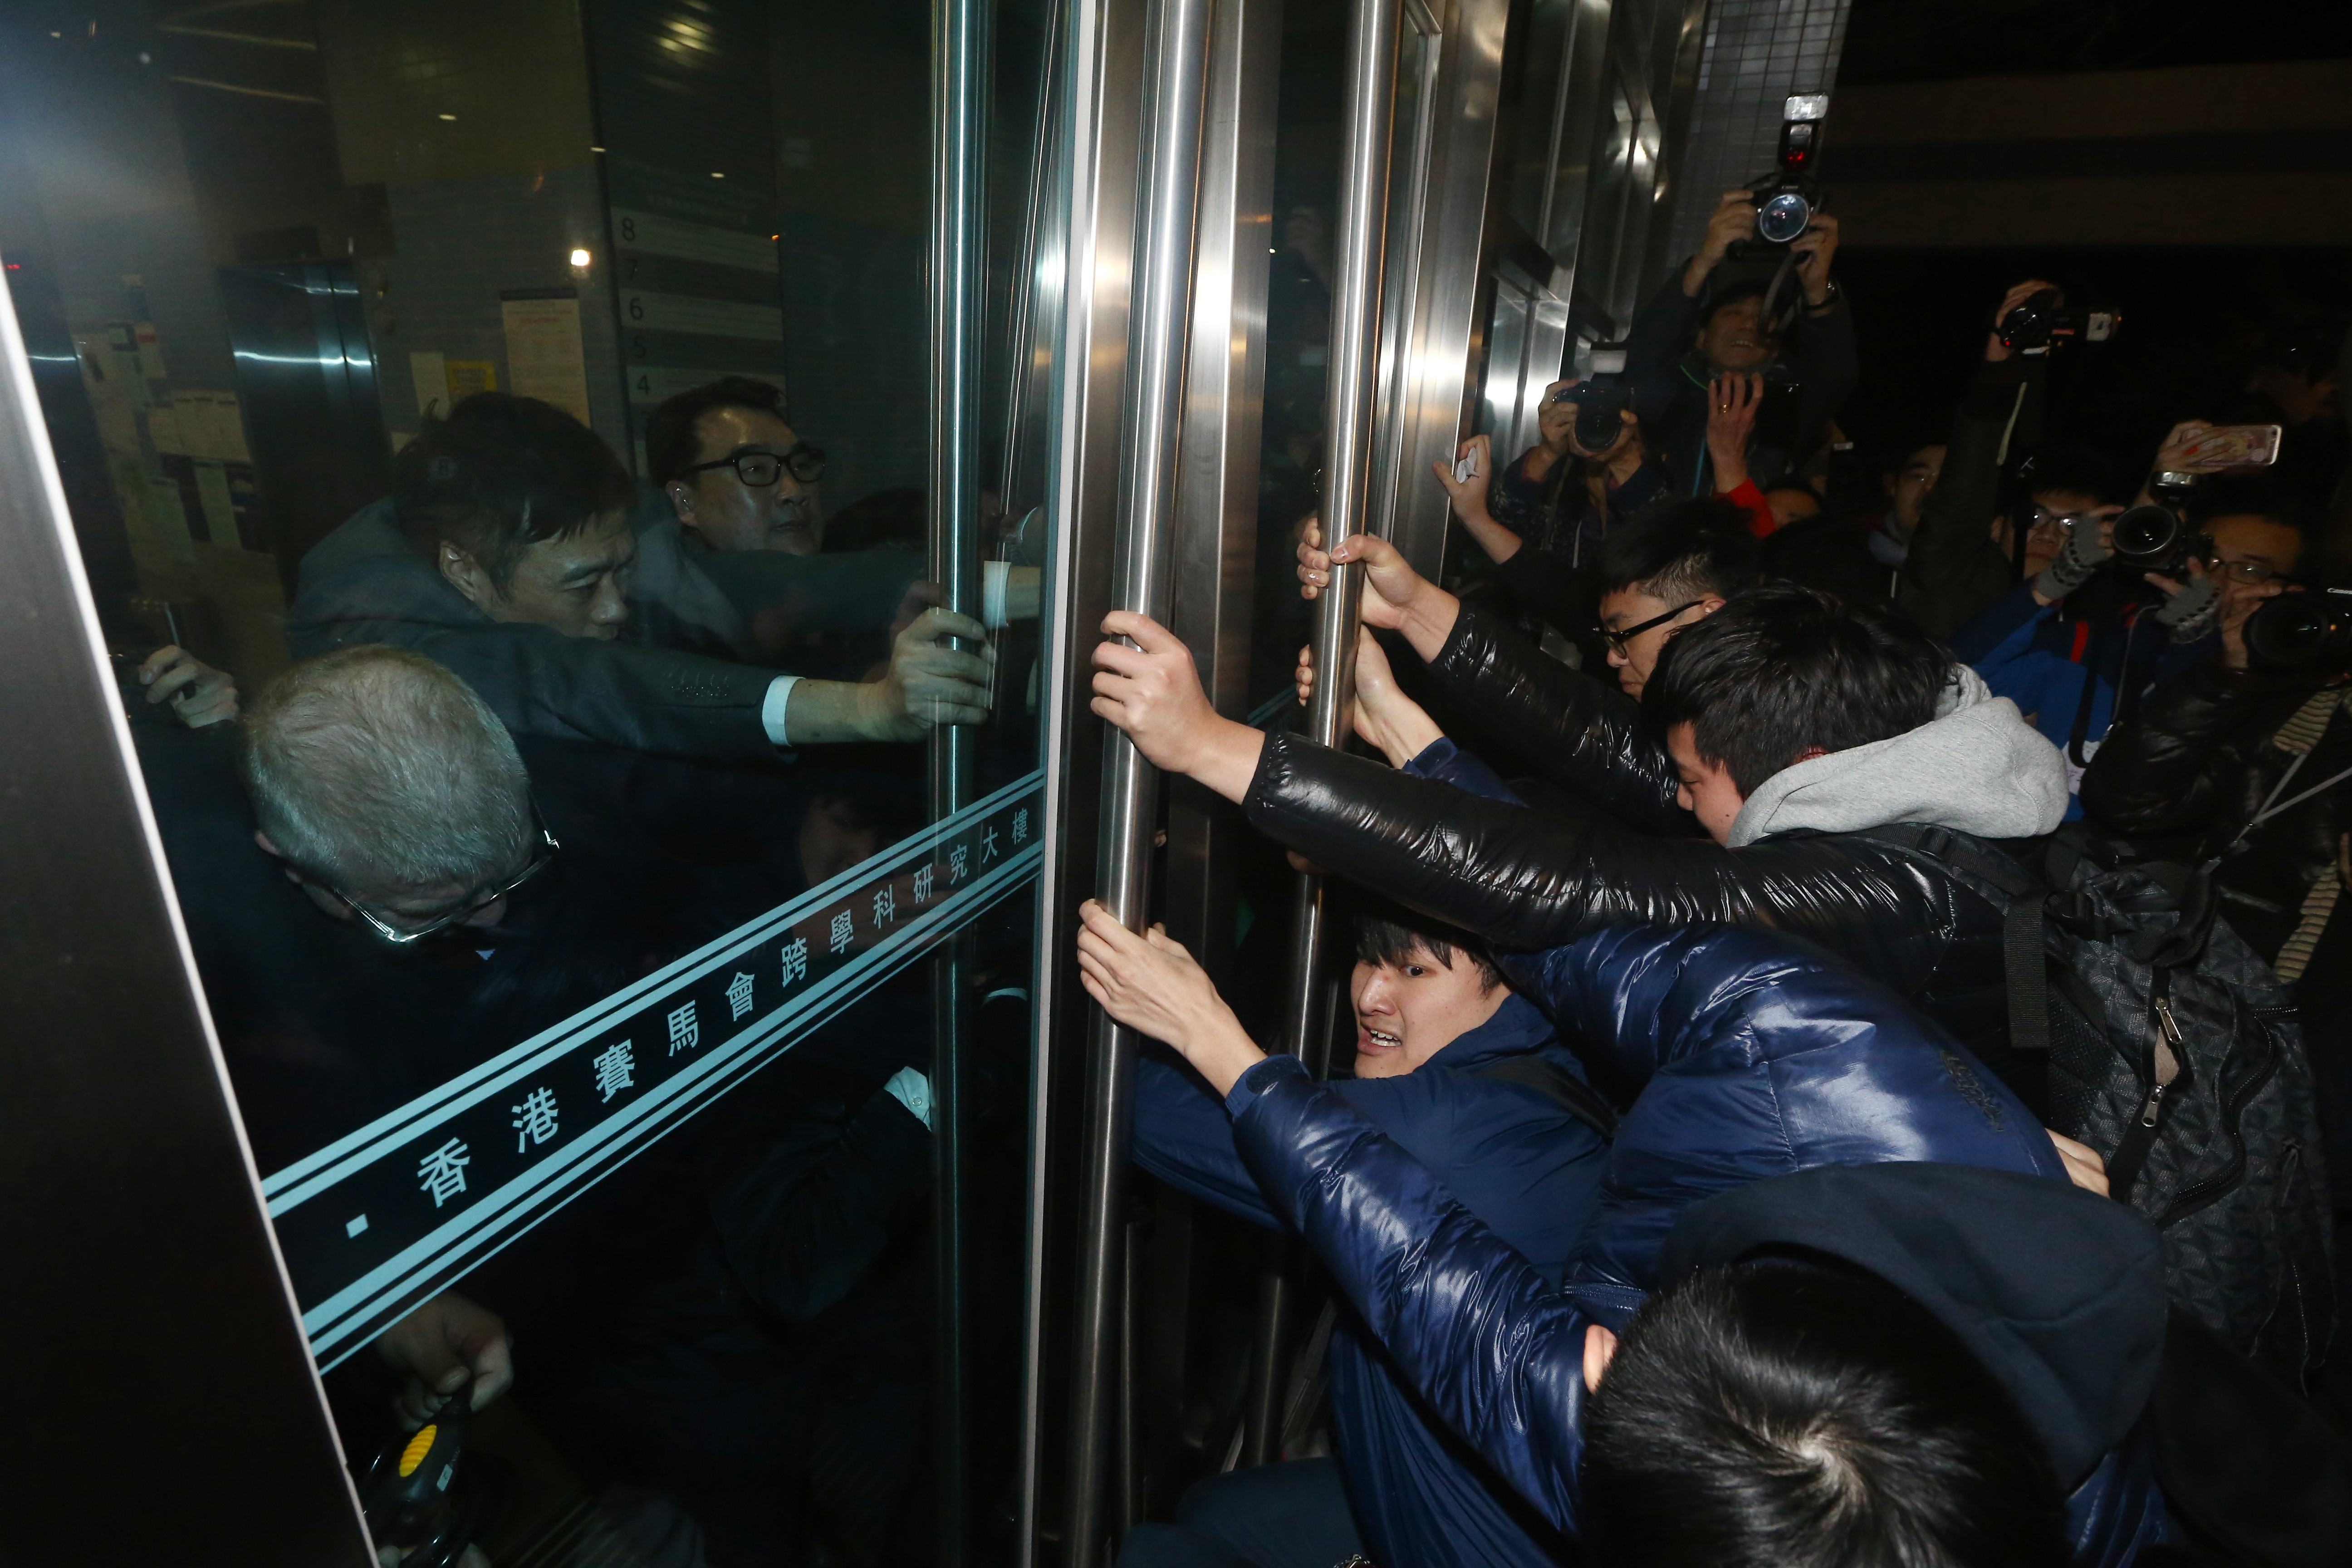 HKU students try to break into the The Hong Kong Jockey Club Building For Interdisciplinary Research on Sassoon Road in Pok Fu Lam, where the council meeting was held. Photo: Sam Tsang